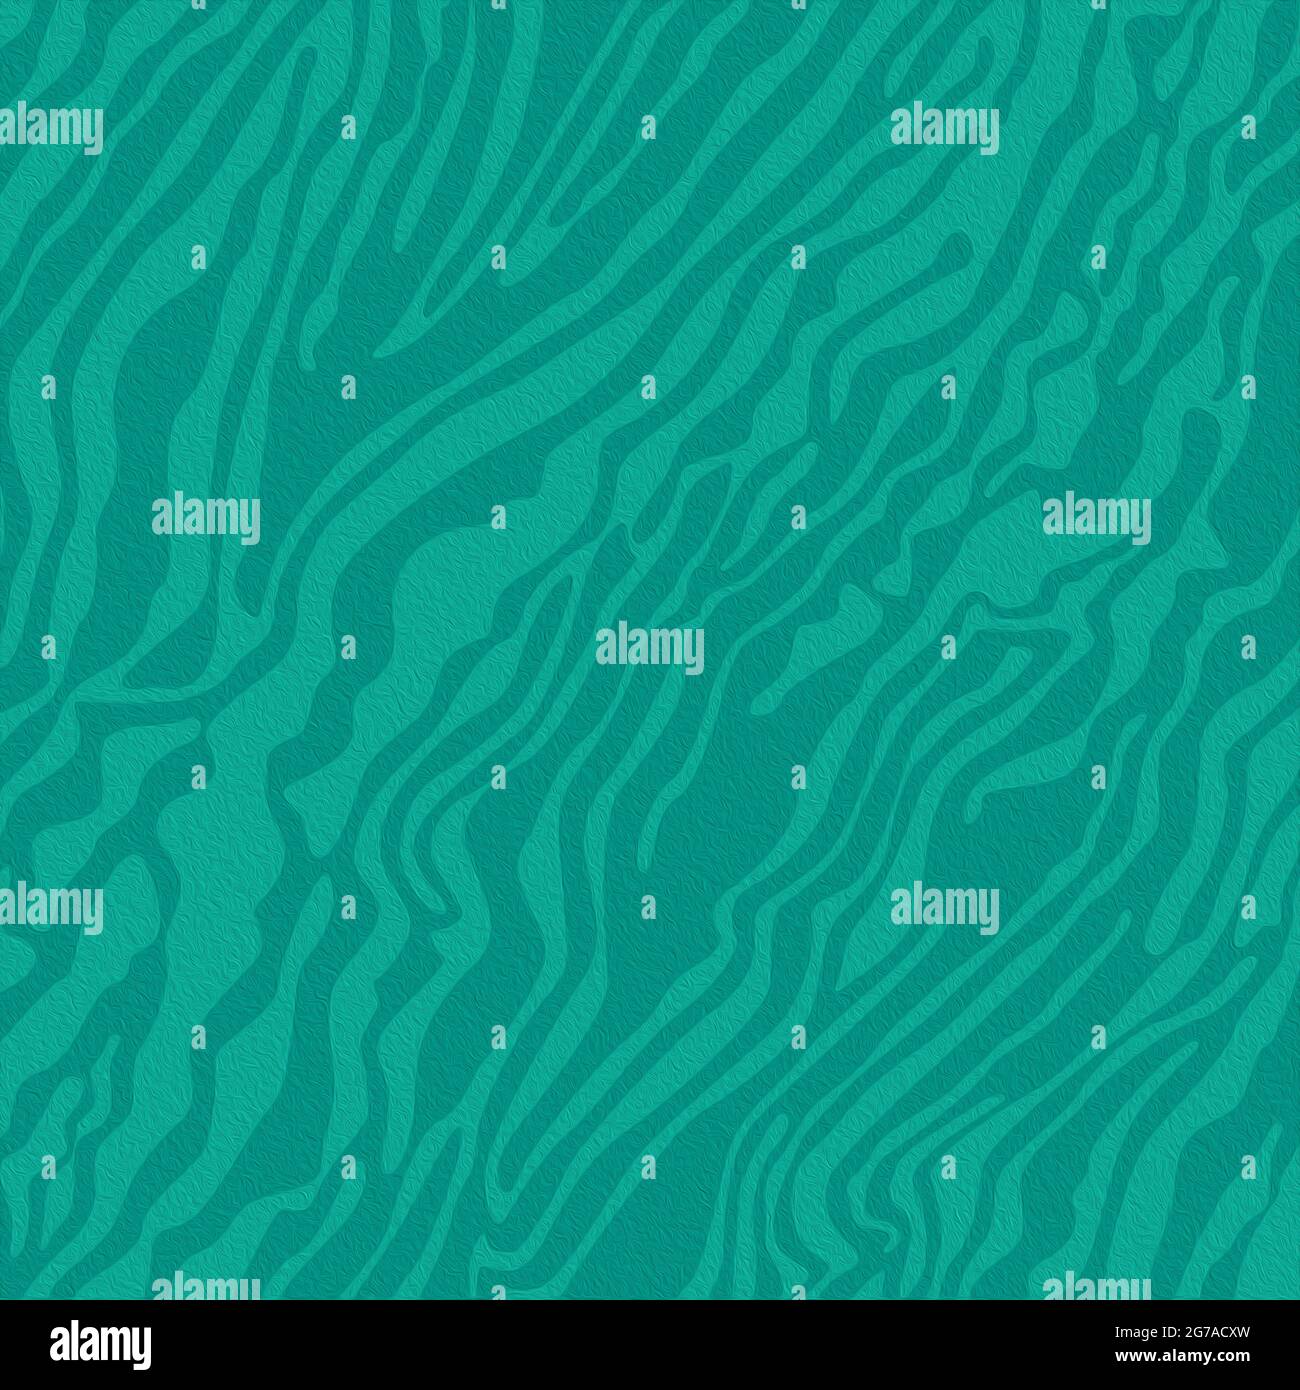 Pattern Of Randomly Chaotic Wavy Shapes In Turquoise Hues On The Muted Background Hand Drawing